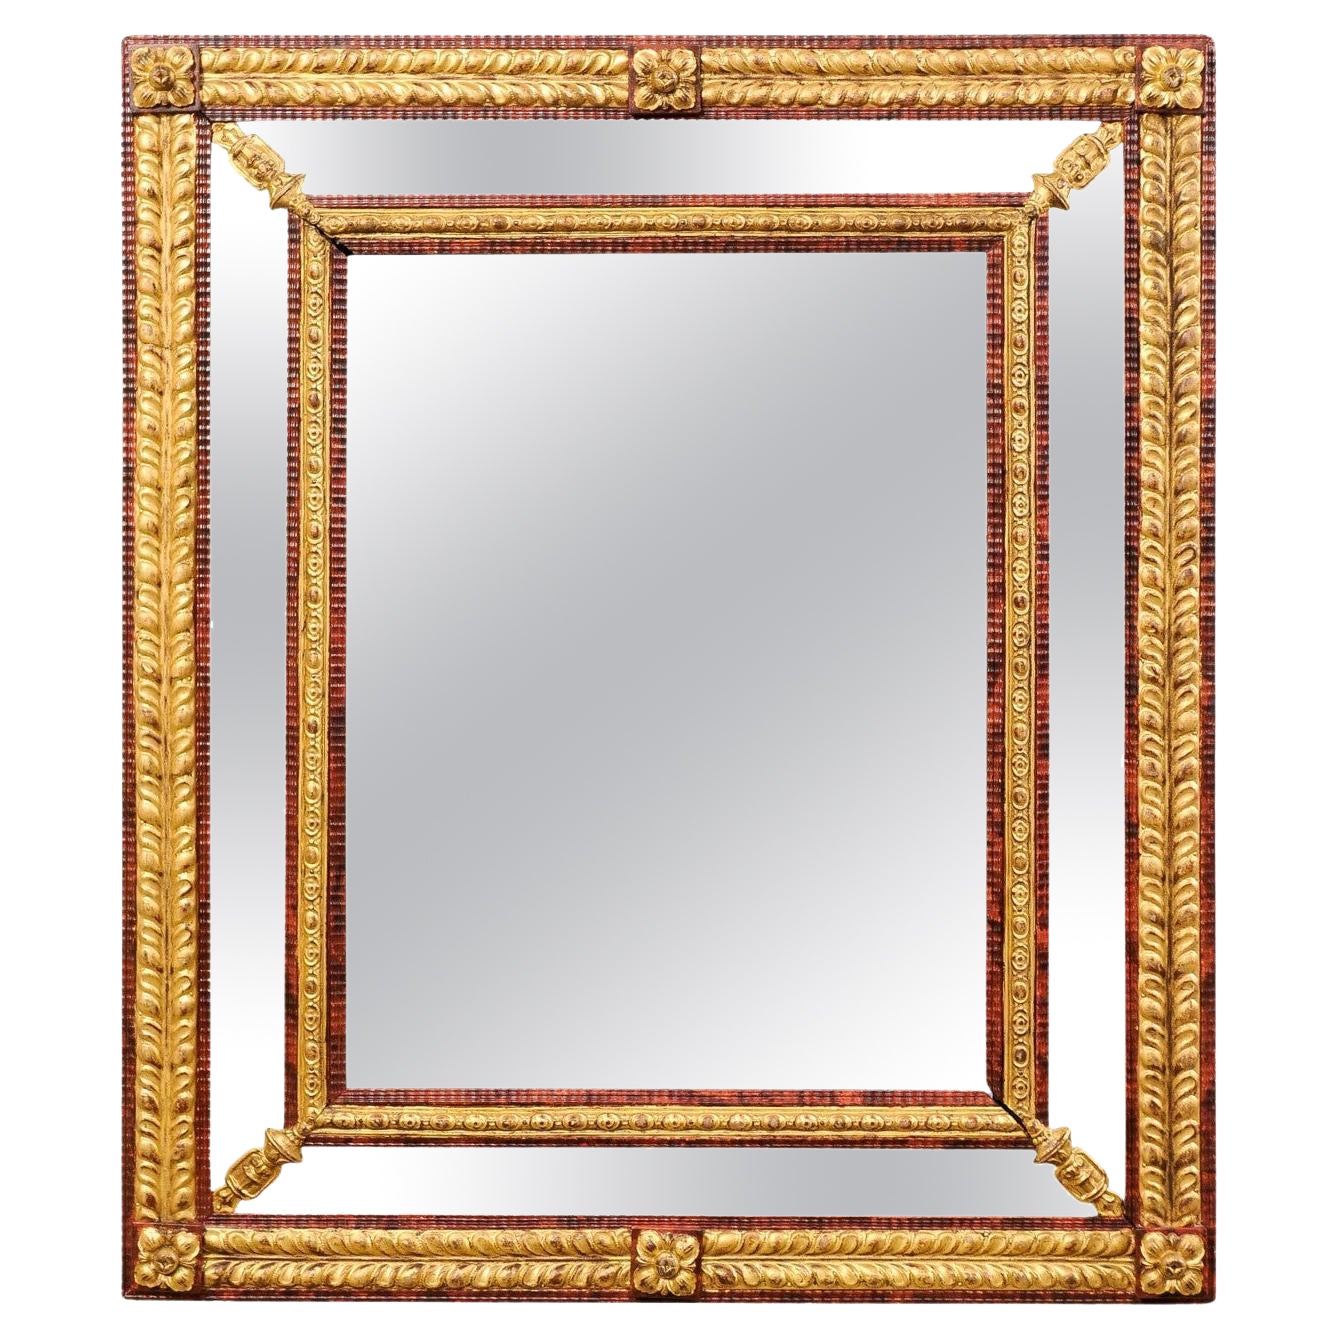 Italian 19th Century Gilt & Red Embossed Repoussé Mirror, Tall